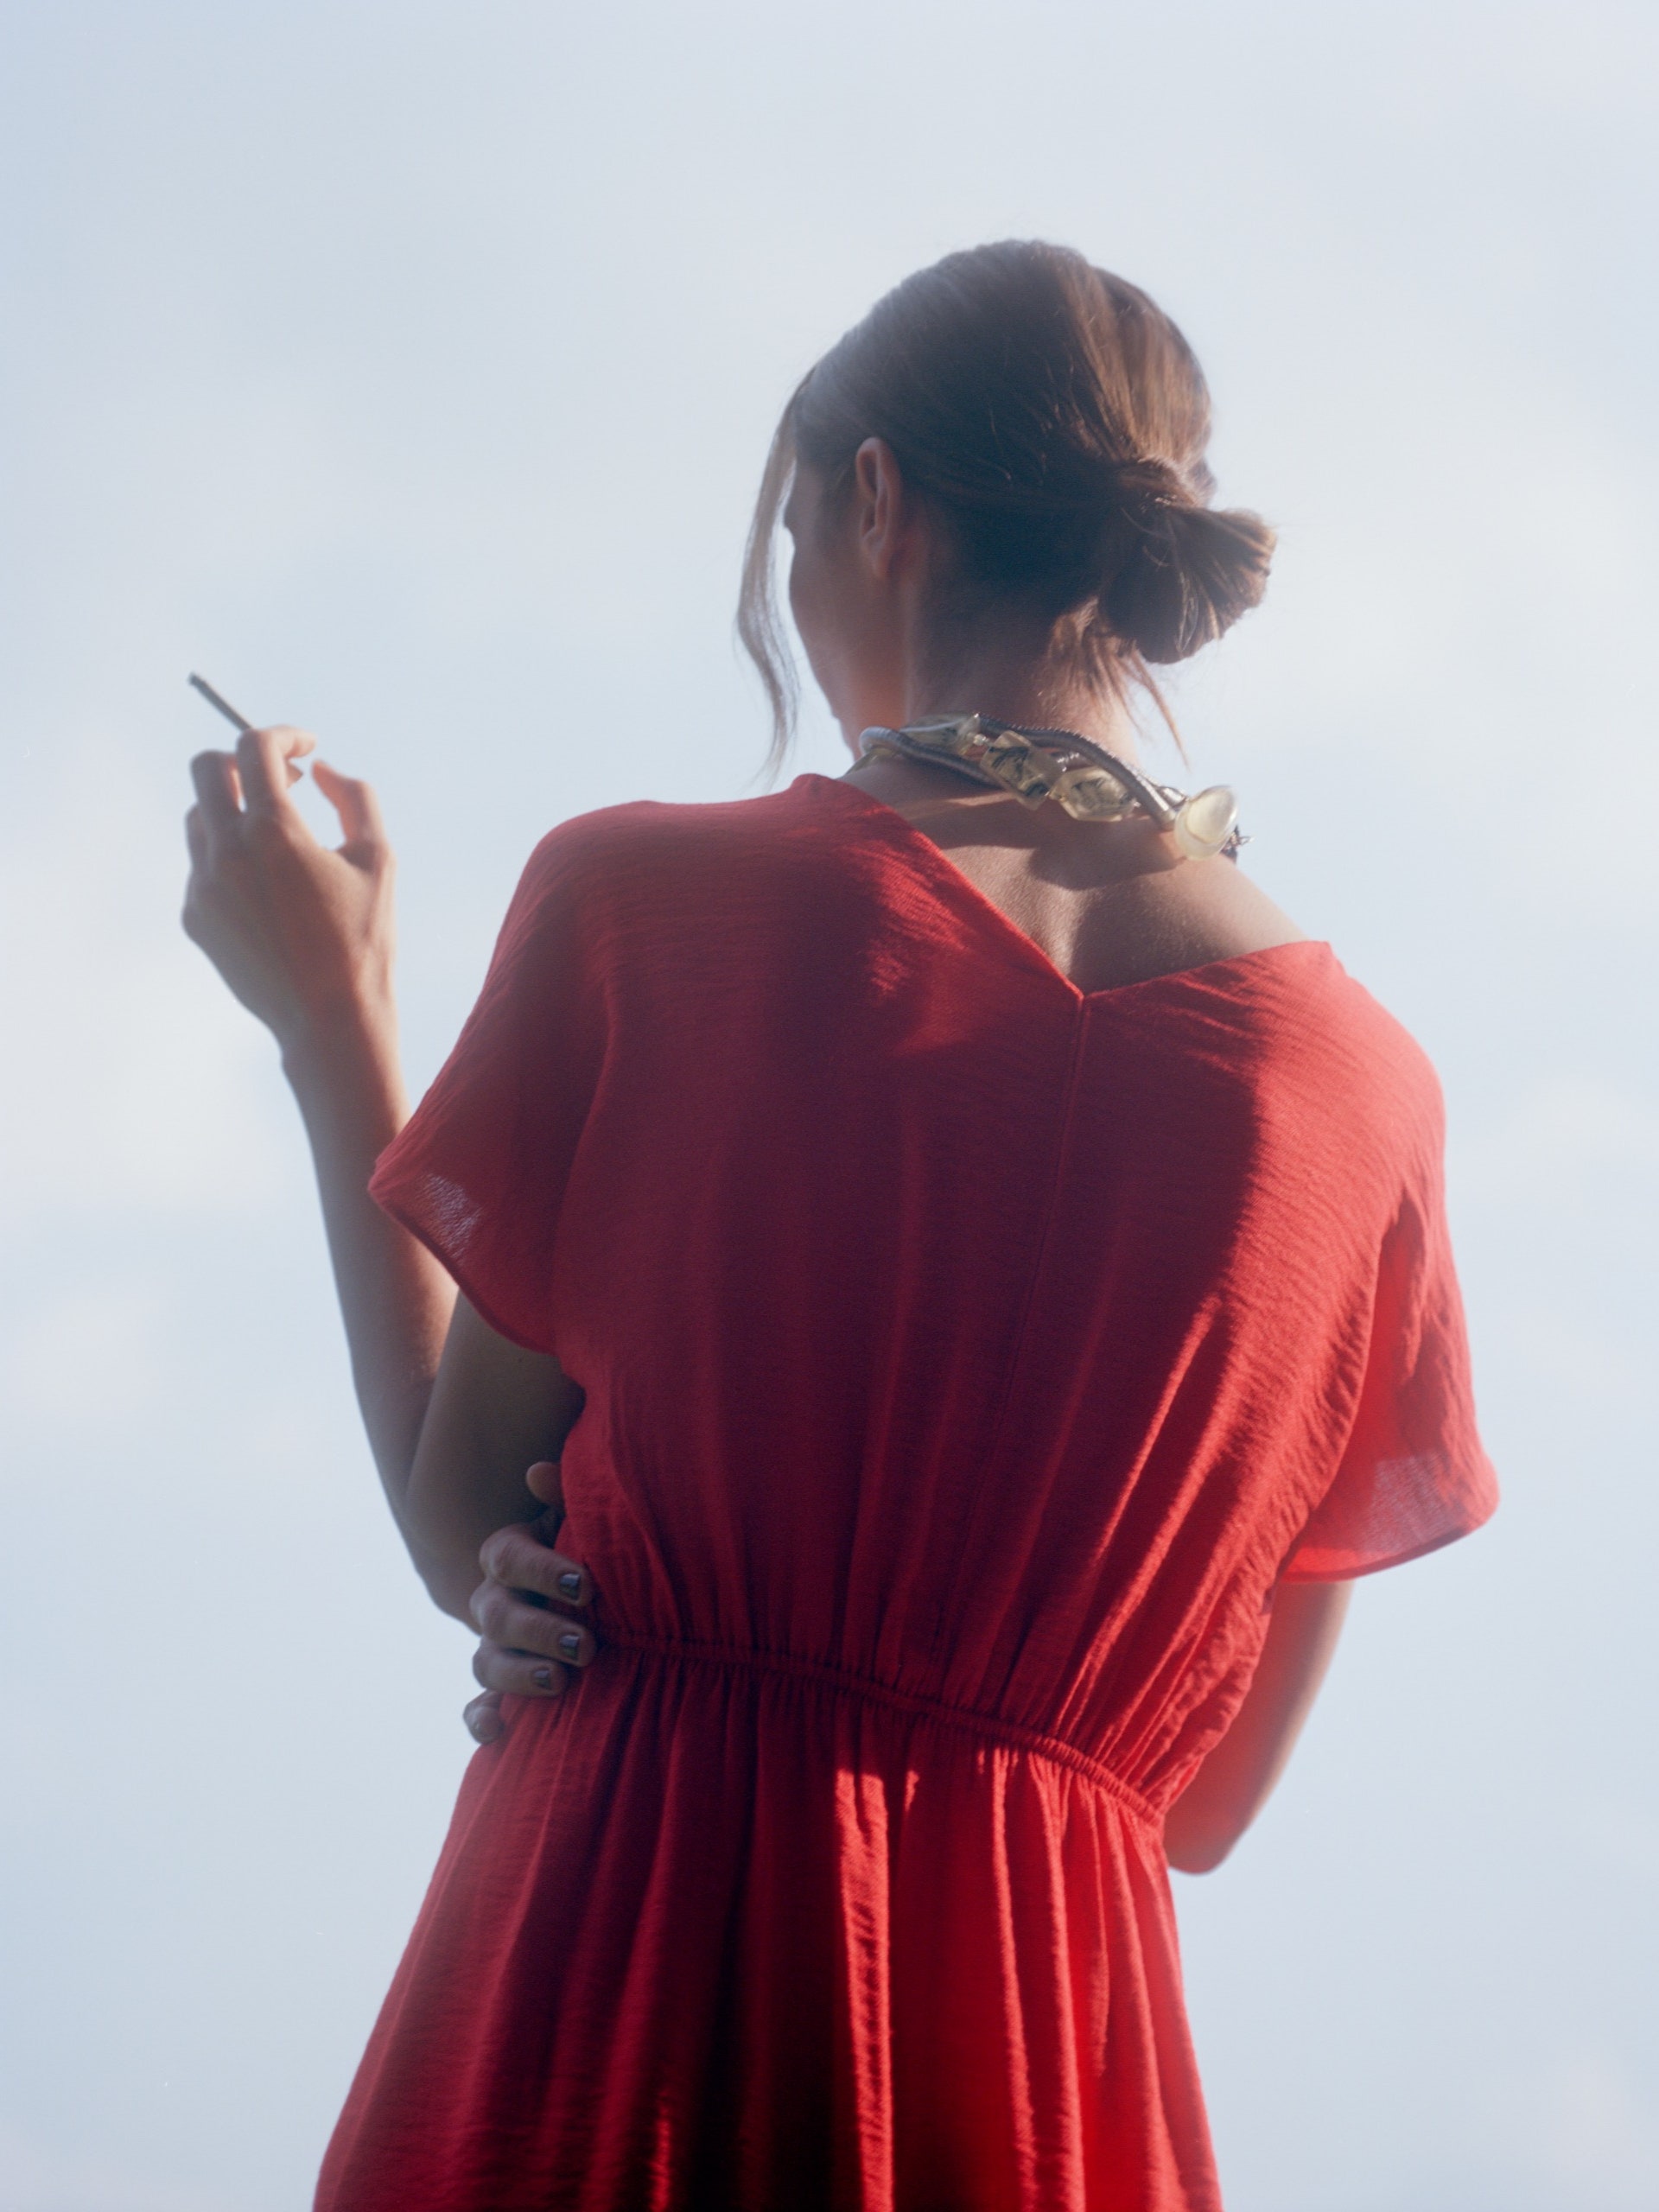 A person wearing an orangered dress with their back to the camera holds a cigarette.